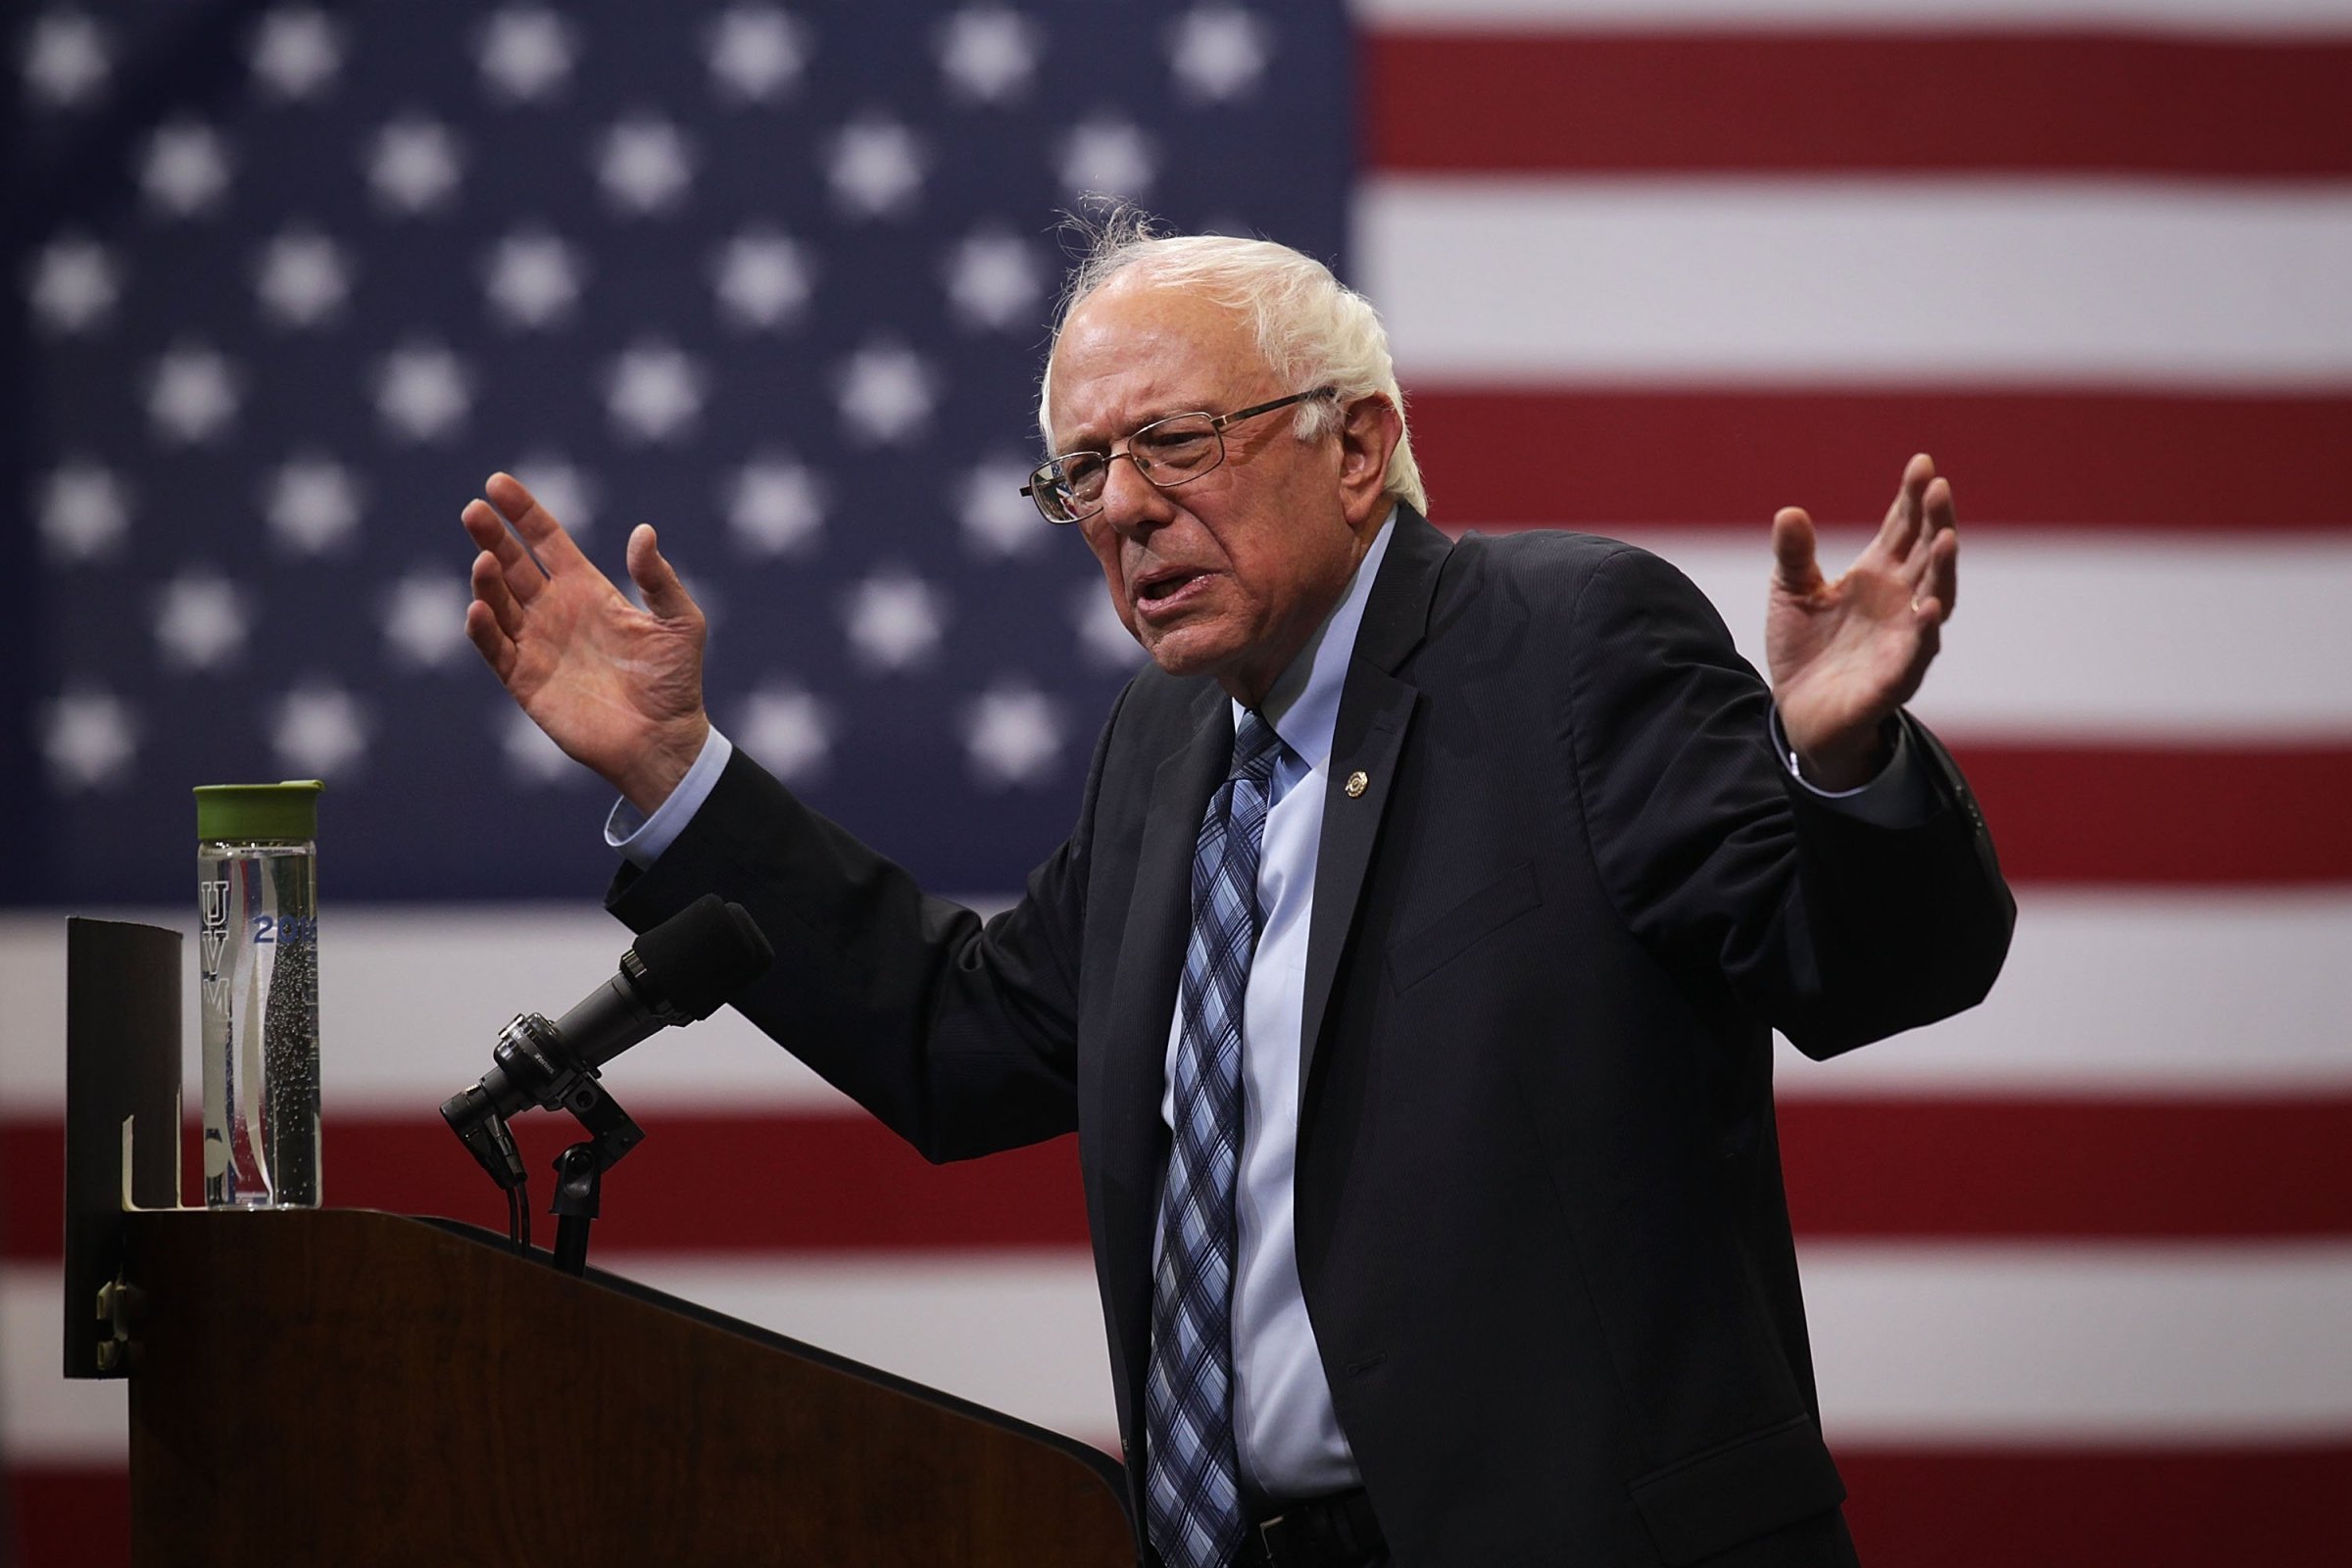 Democratic presidential candidate and U.S. Sen. Bernie Sanders (I-VT) speaks during a "National Student Town Hall" at George Mason University on Oct. 28, 2015 in Fairfax, Virginia.